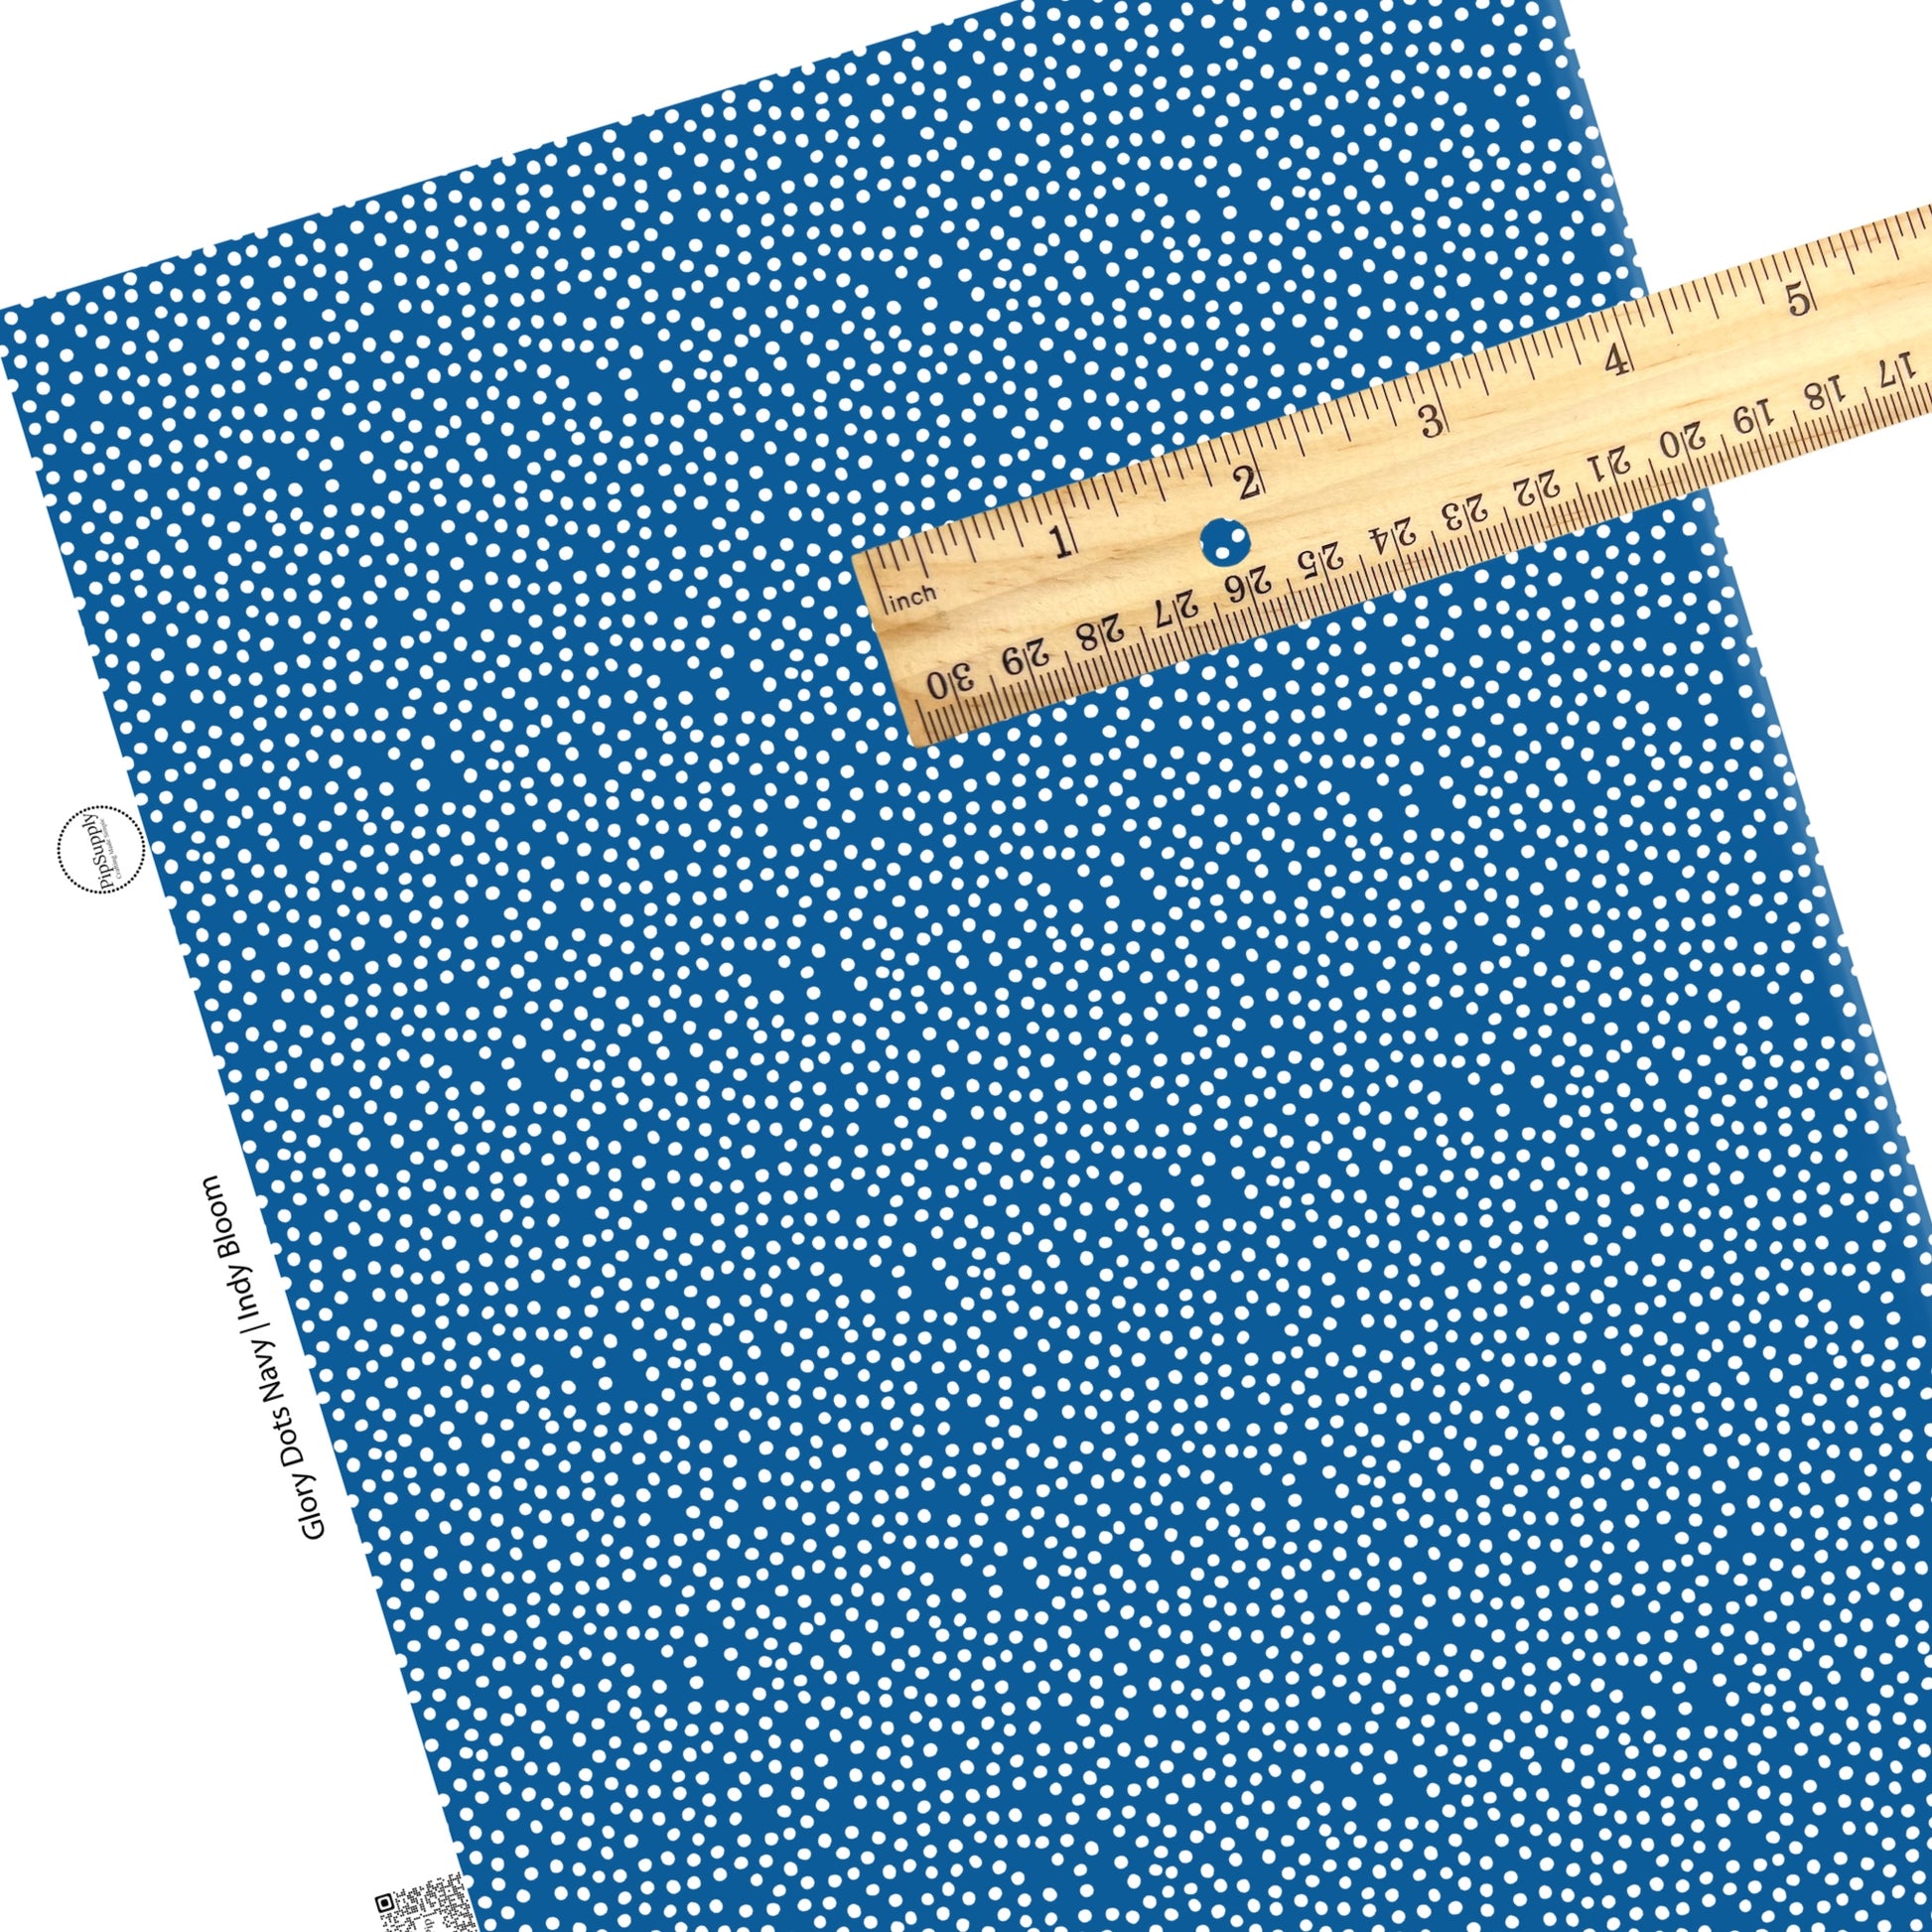 These 4th of July faux leather sheets contain the following design elements: patriotic white dots on blue. Our CPSIA compliant faux leather sheets or rolls can be used for all types of crafting projects.